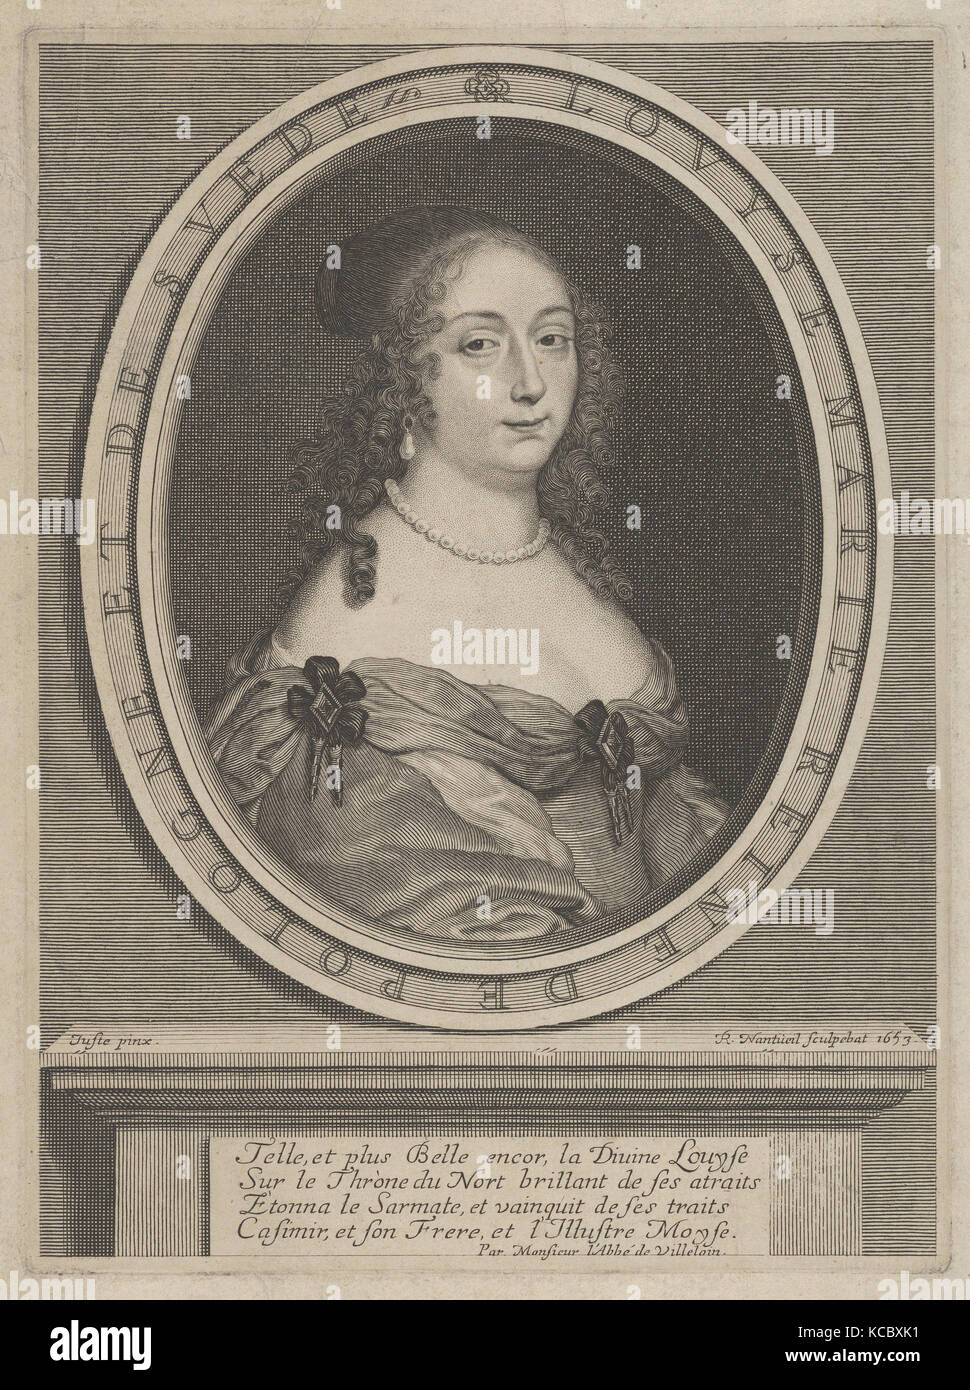 Portrait of Louise Marie, Queen of Poland and Sweden, Robert Nanteuil, 1653 Stock Photo